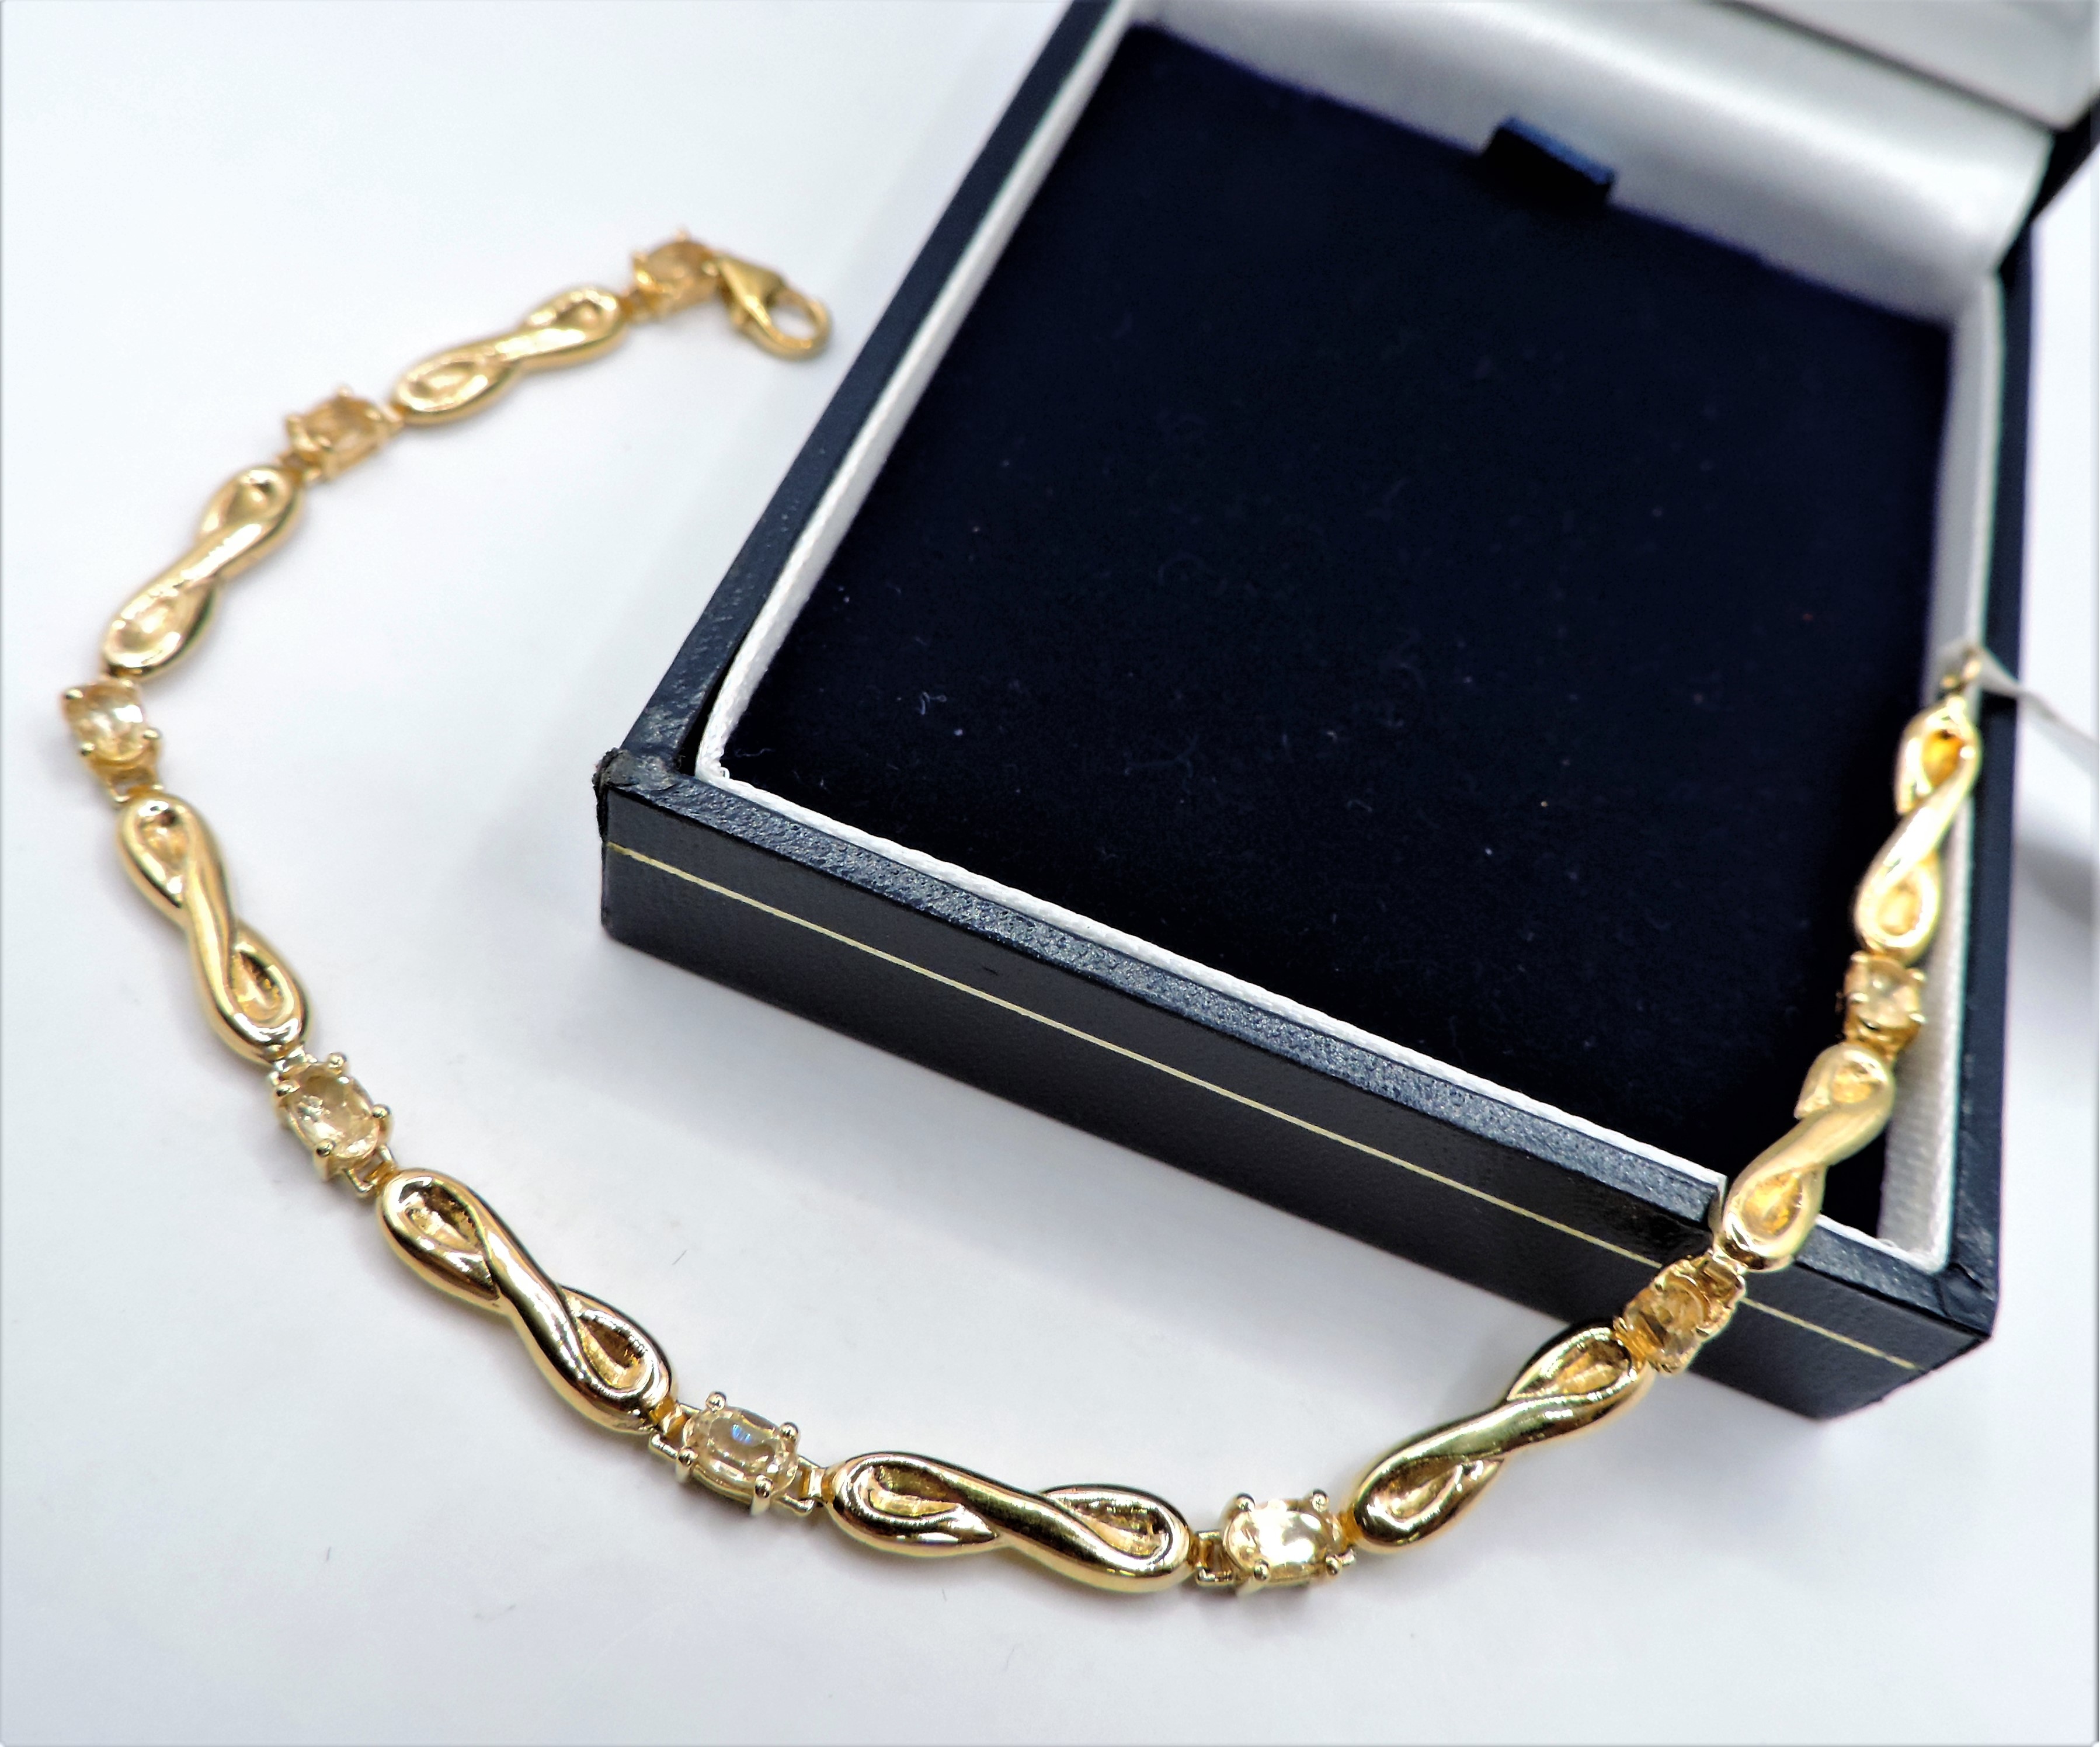 Gold on Sterling Silver Citrine Bracelet 'New' with Gift Box - Image 2 of 3